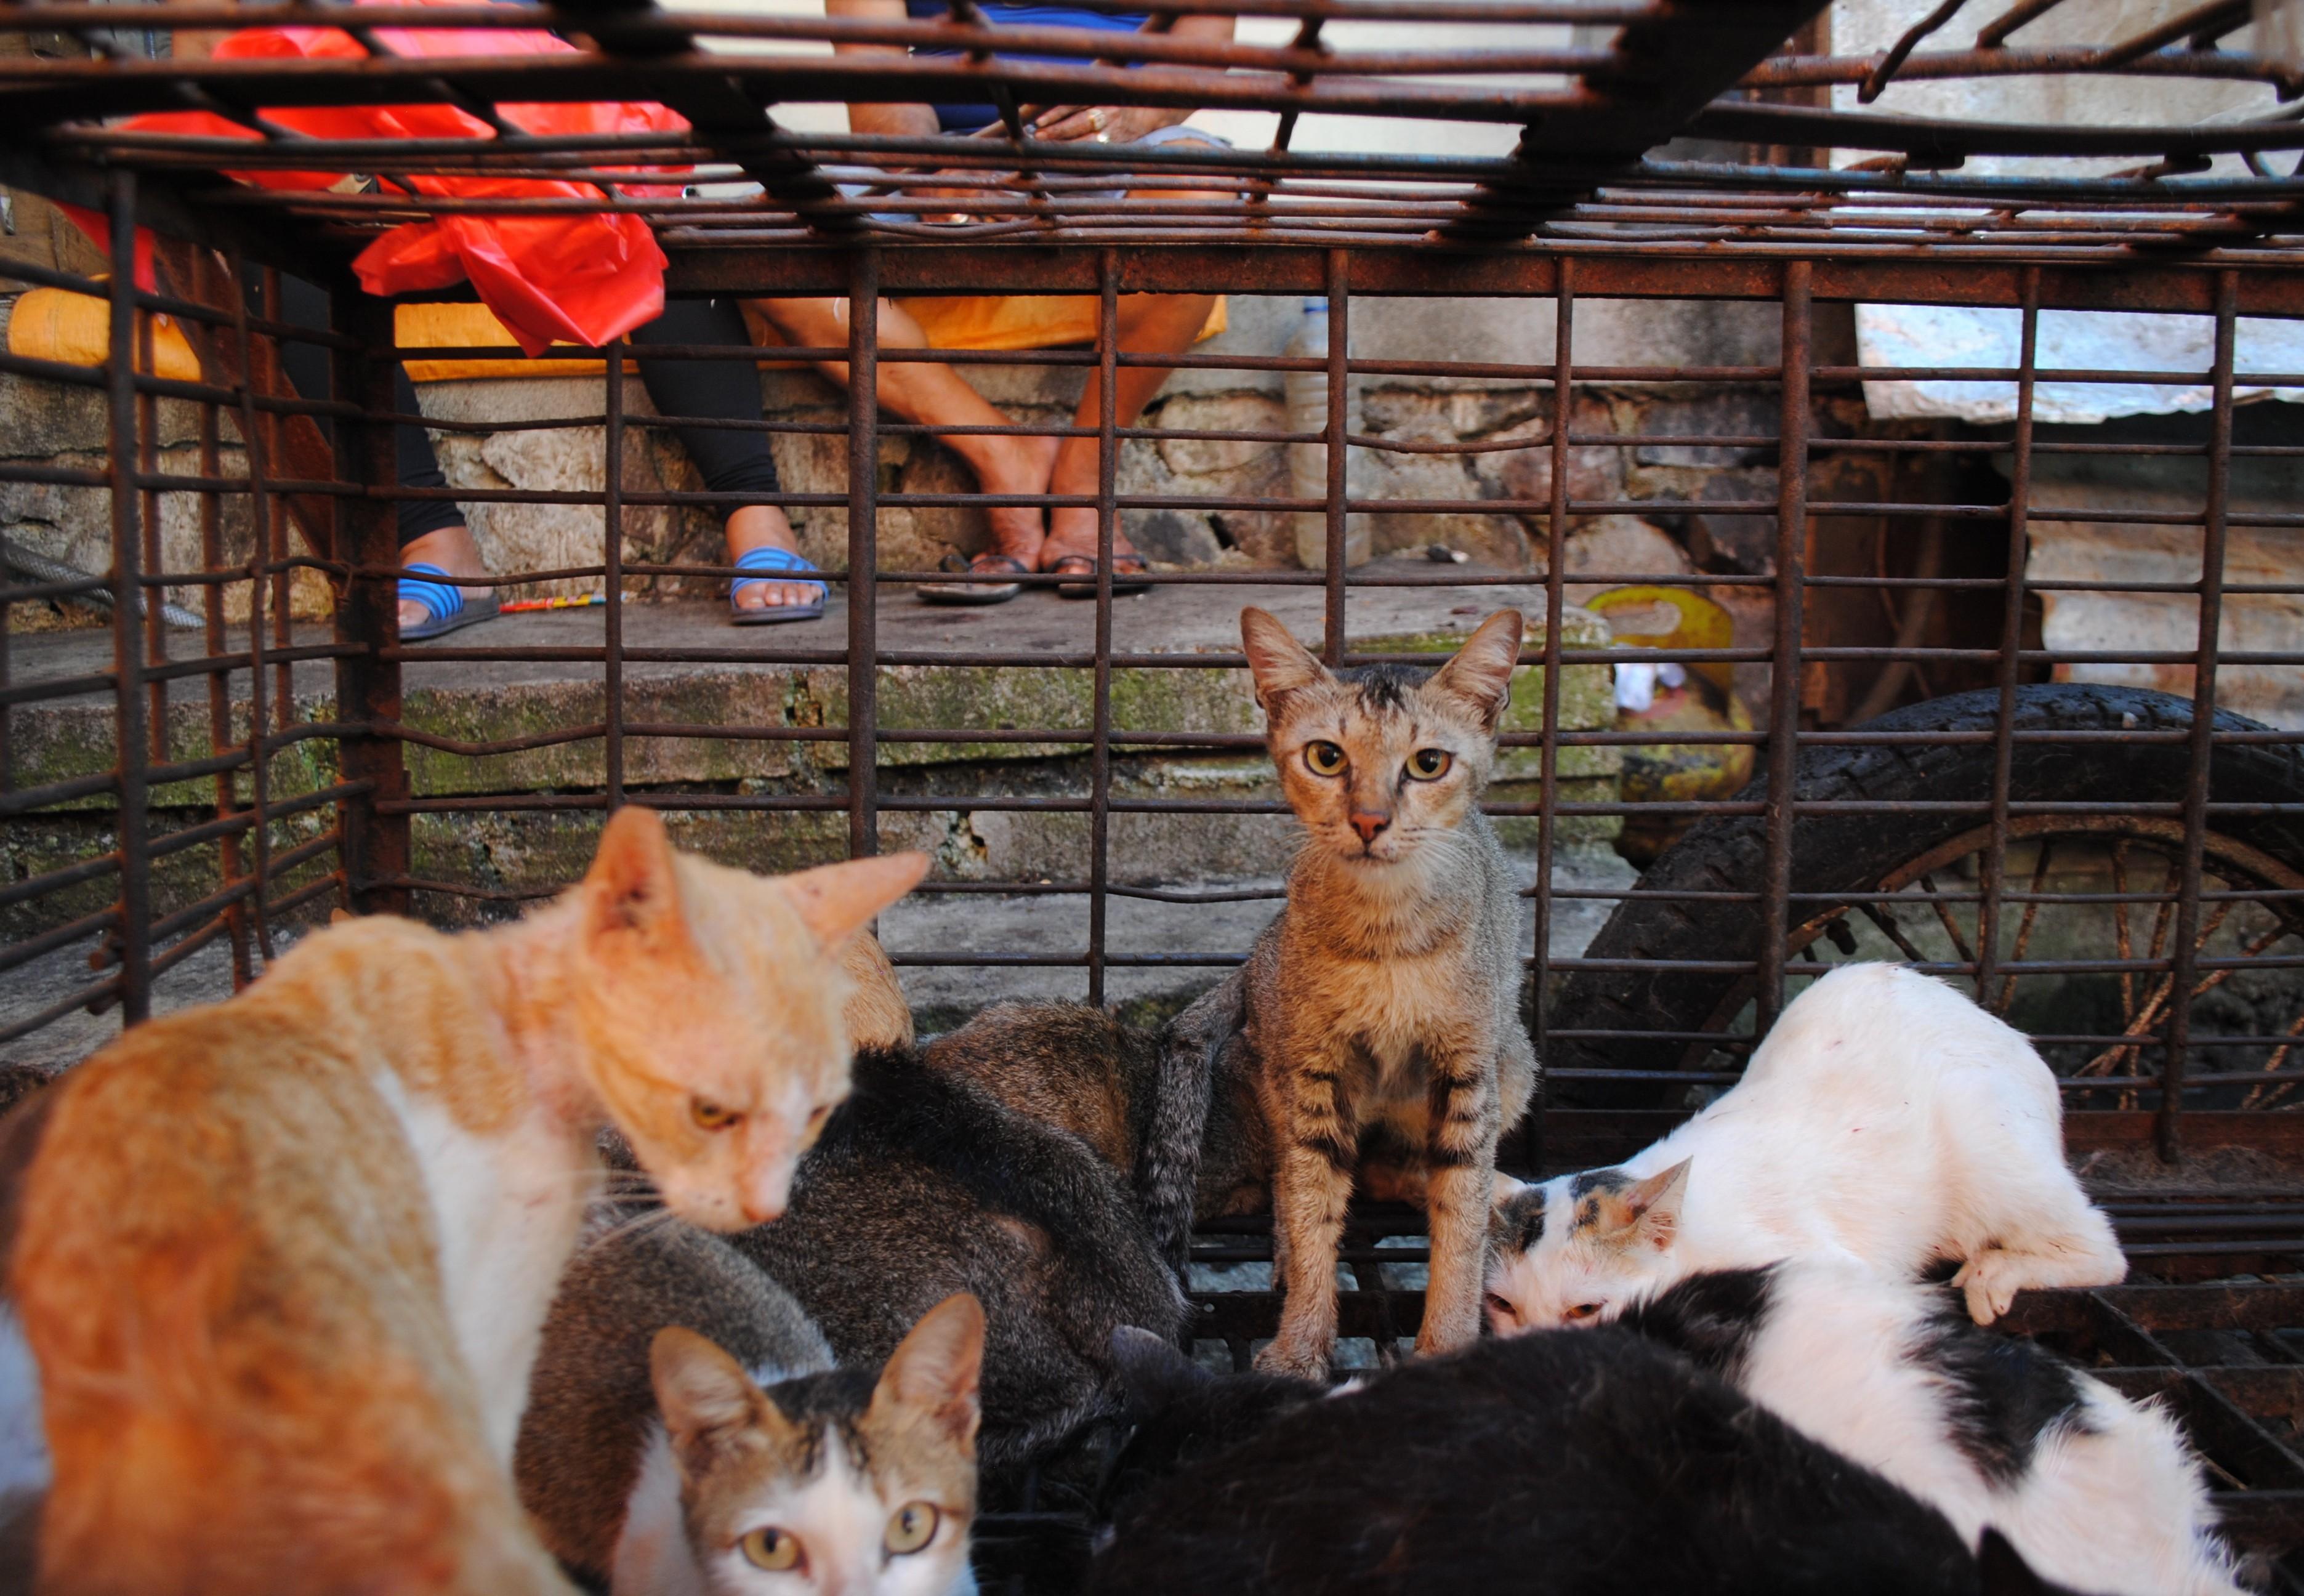 British actor Peter Egan visits “sickening horrors” of North Sulawesi's  brutal dog and cat meat markets, calls on Indonesian government to take  action - FOUR PAWS International - Animal Welfare Organisation